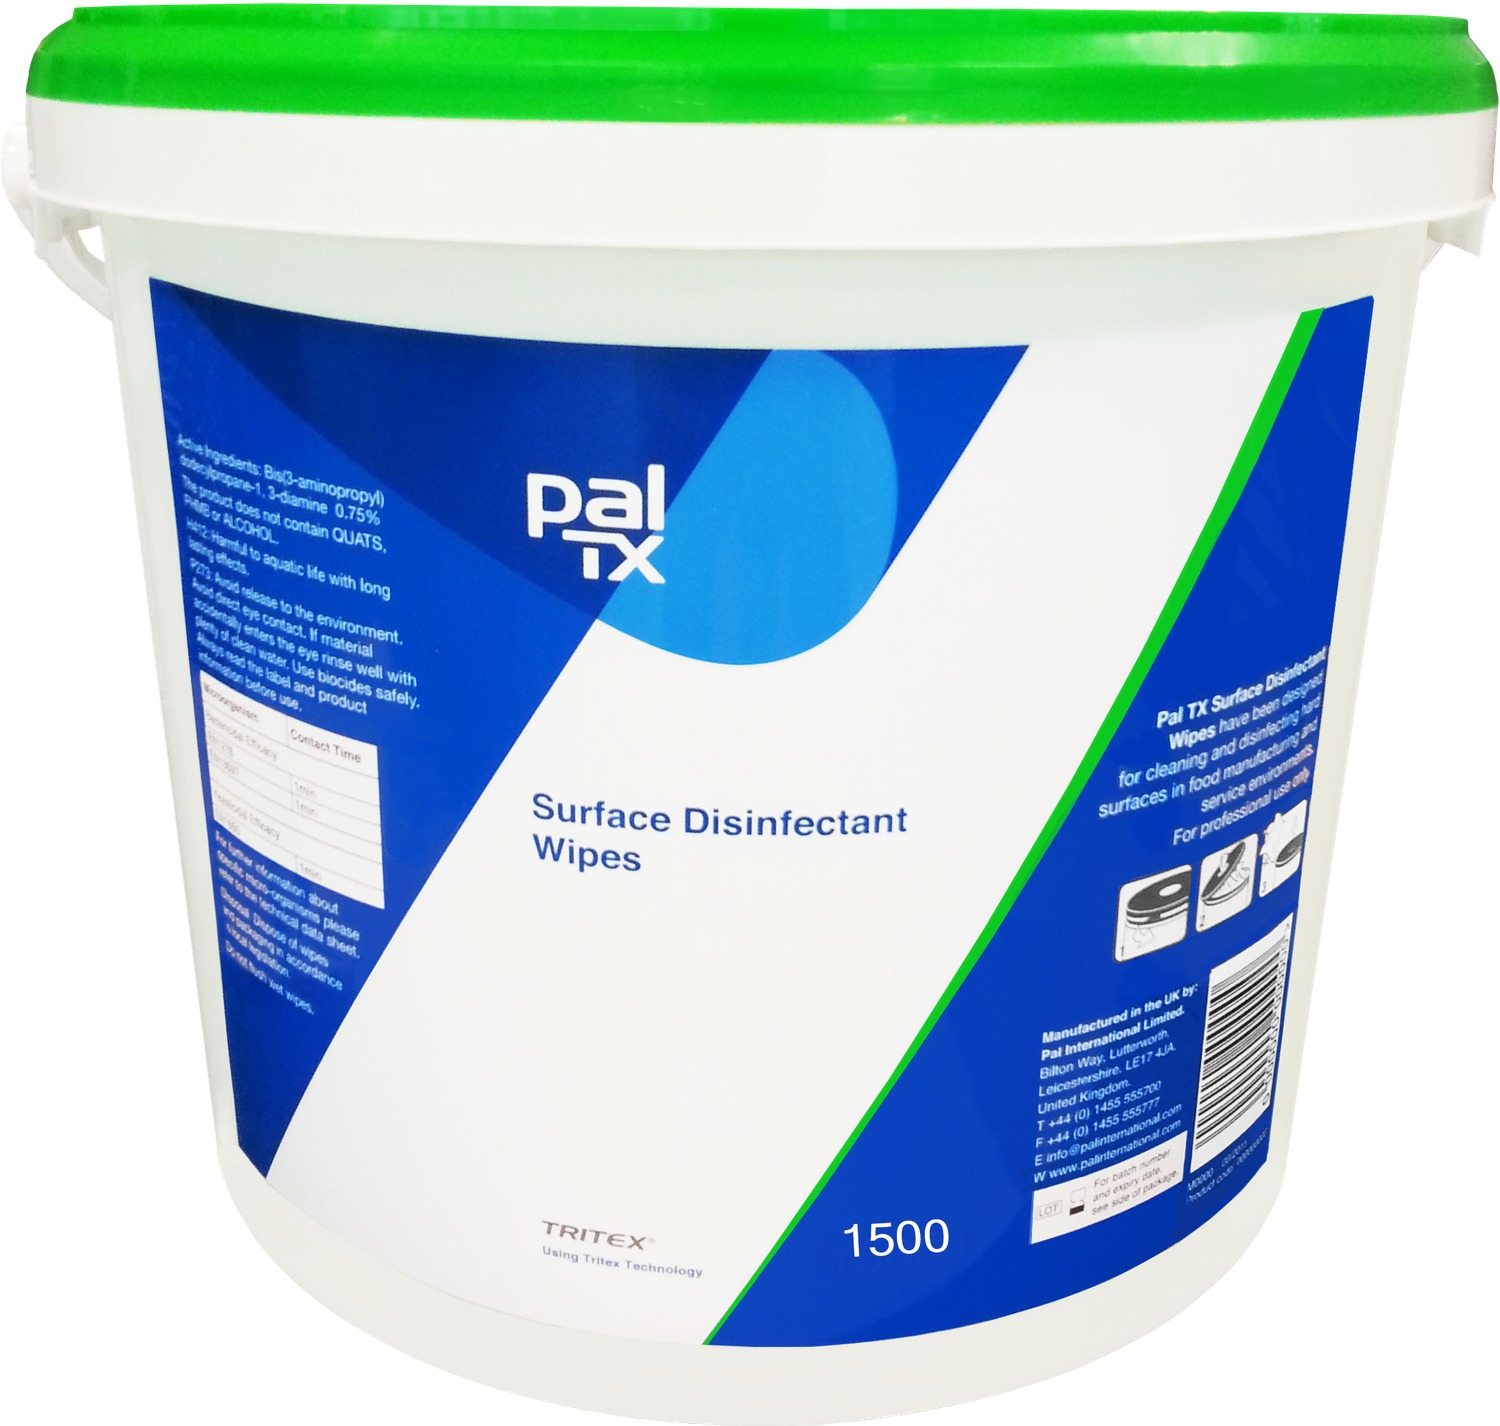 638484518603069309_pal-tx-surface-disinfectant-wipes.jpg